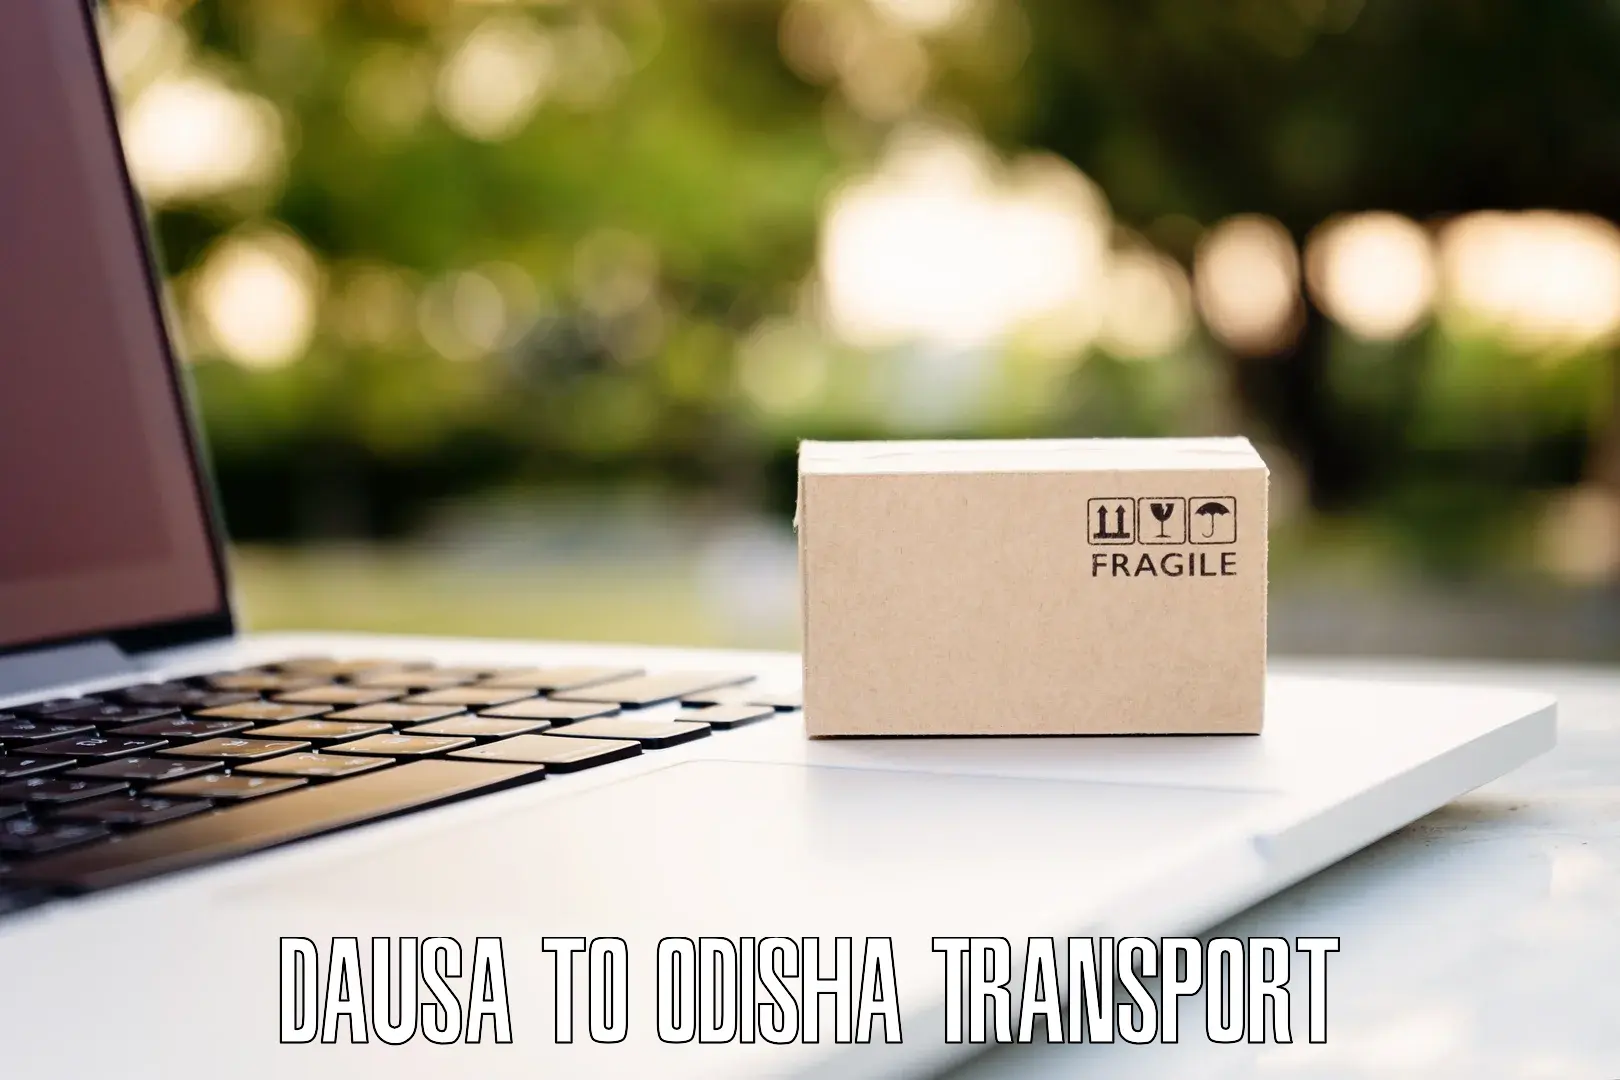 Vehicle transport services Dausa to Cuttack